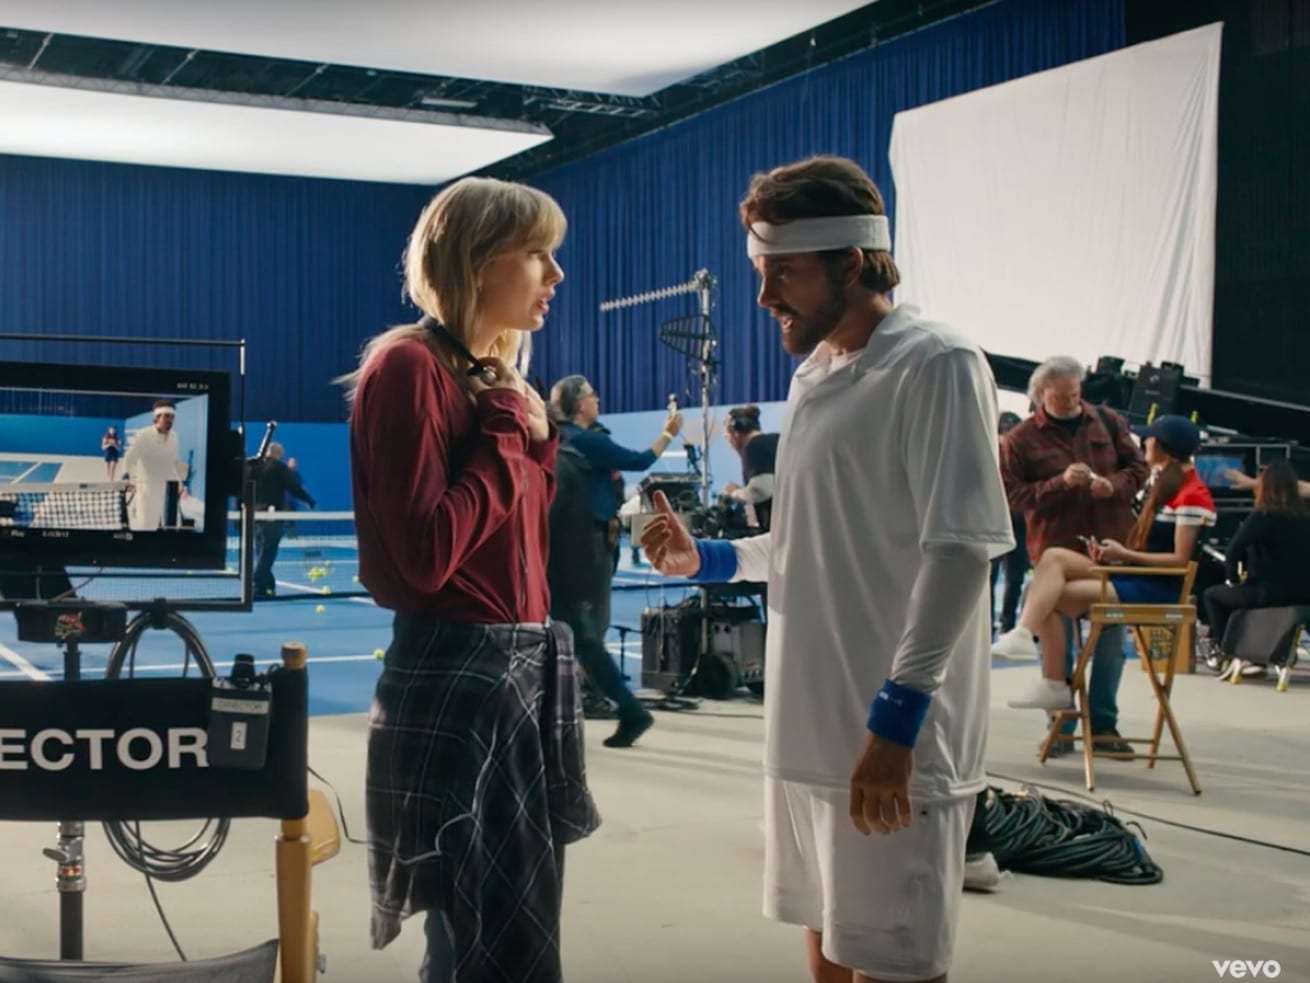 Taylor Swift’s “The Man” video is the climax of her quest to own her voice